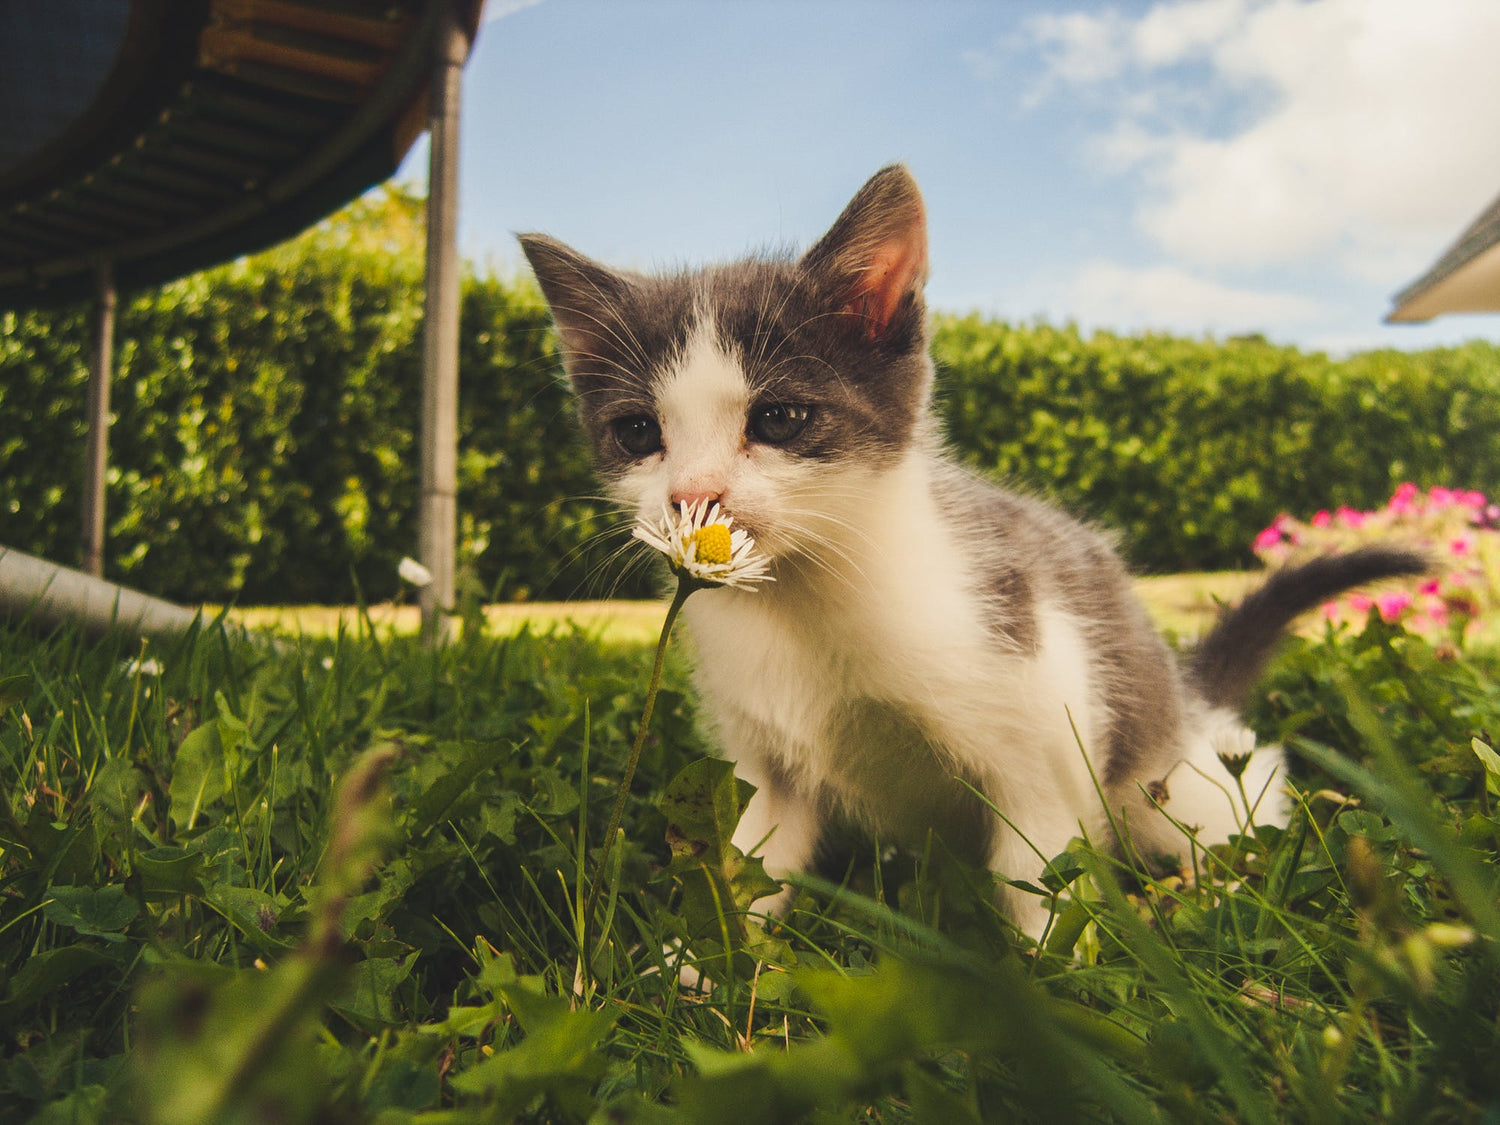 cat sniffing flower in grass